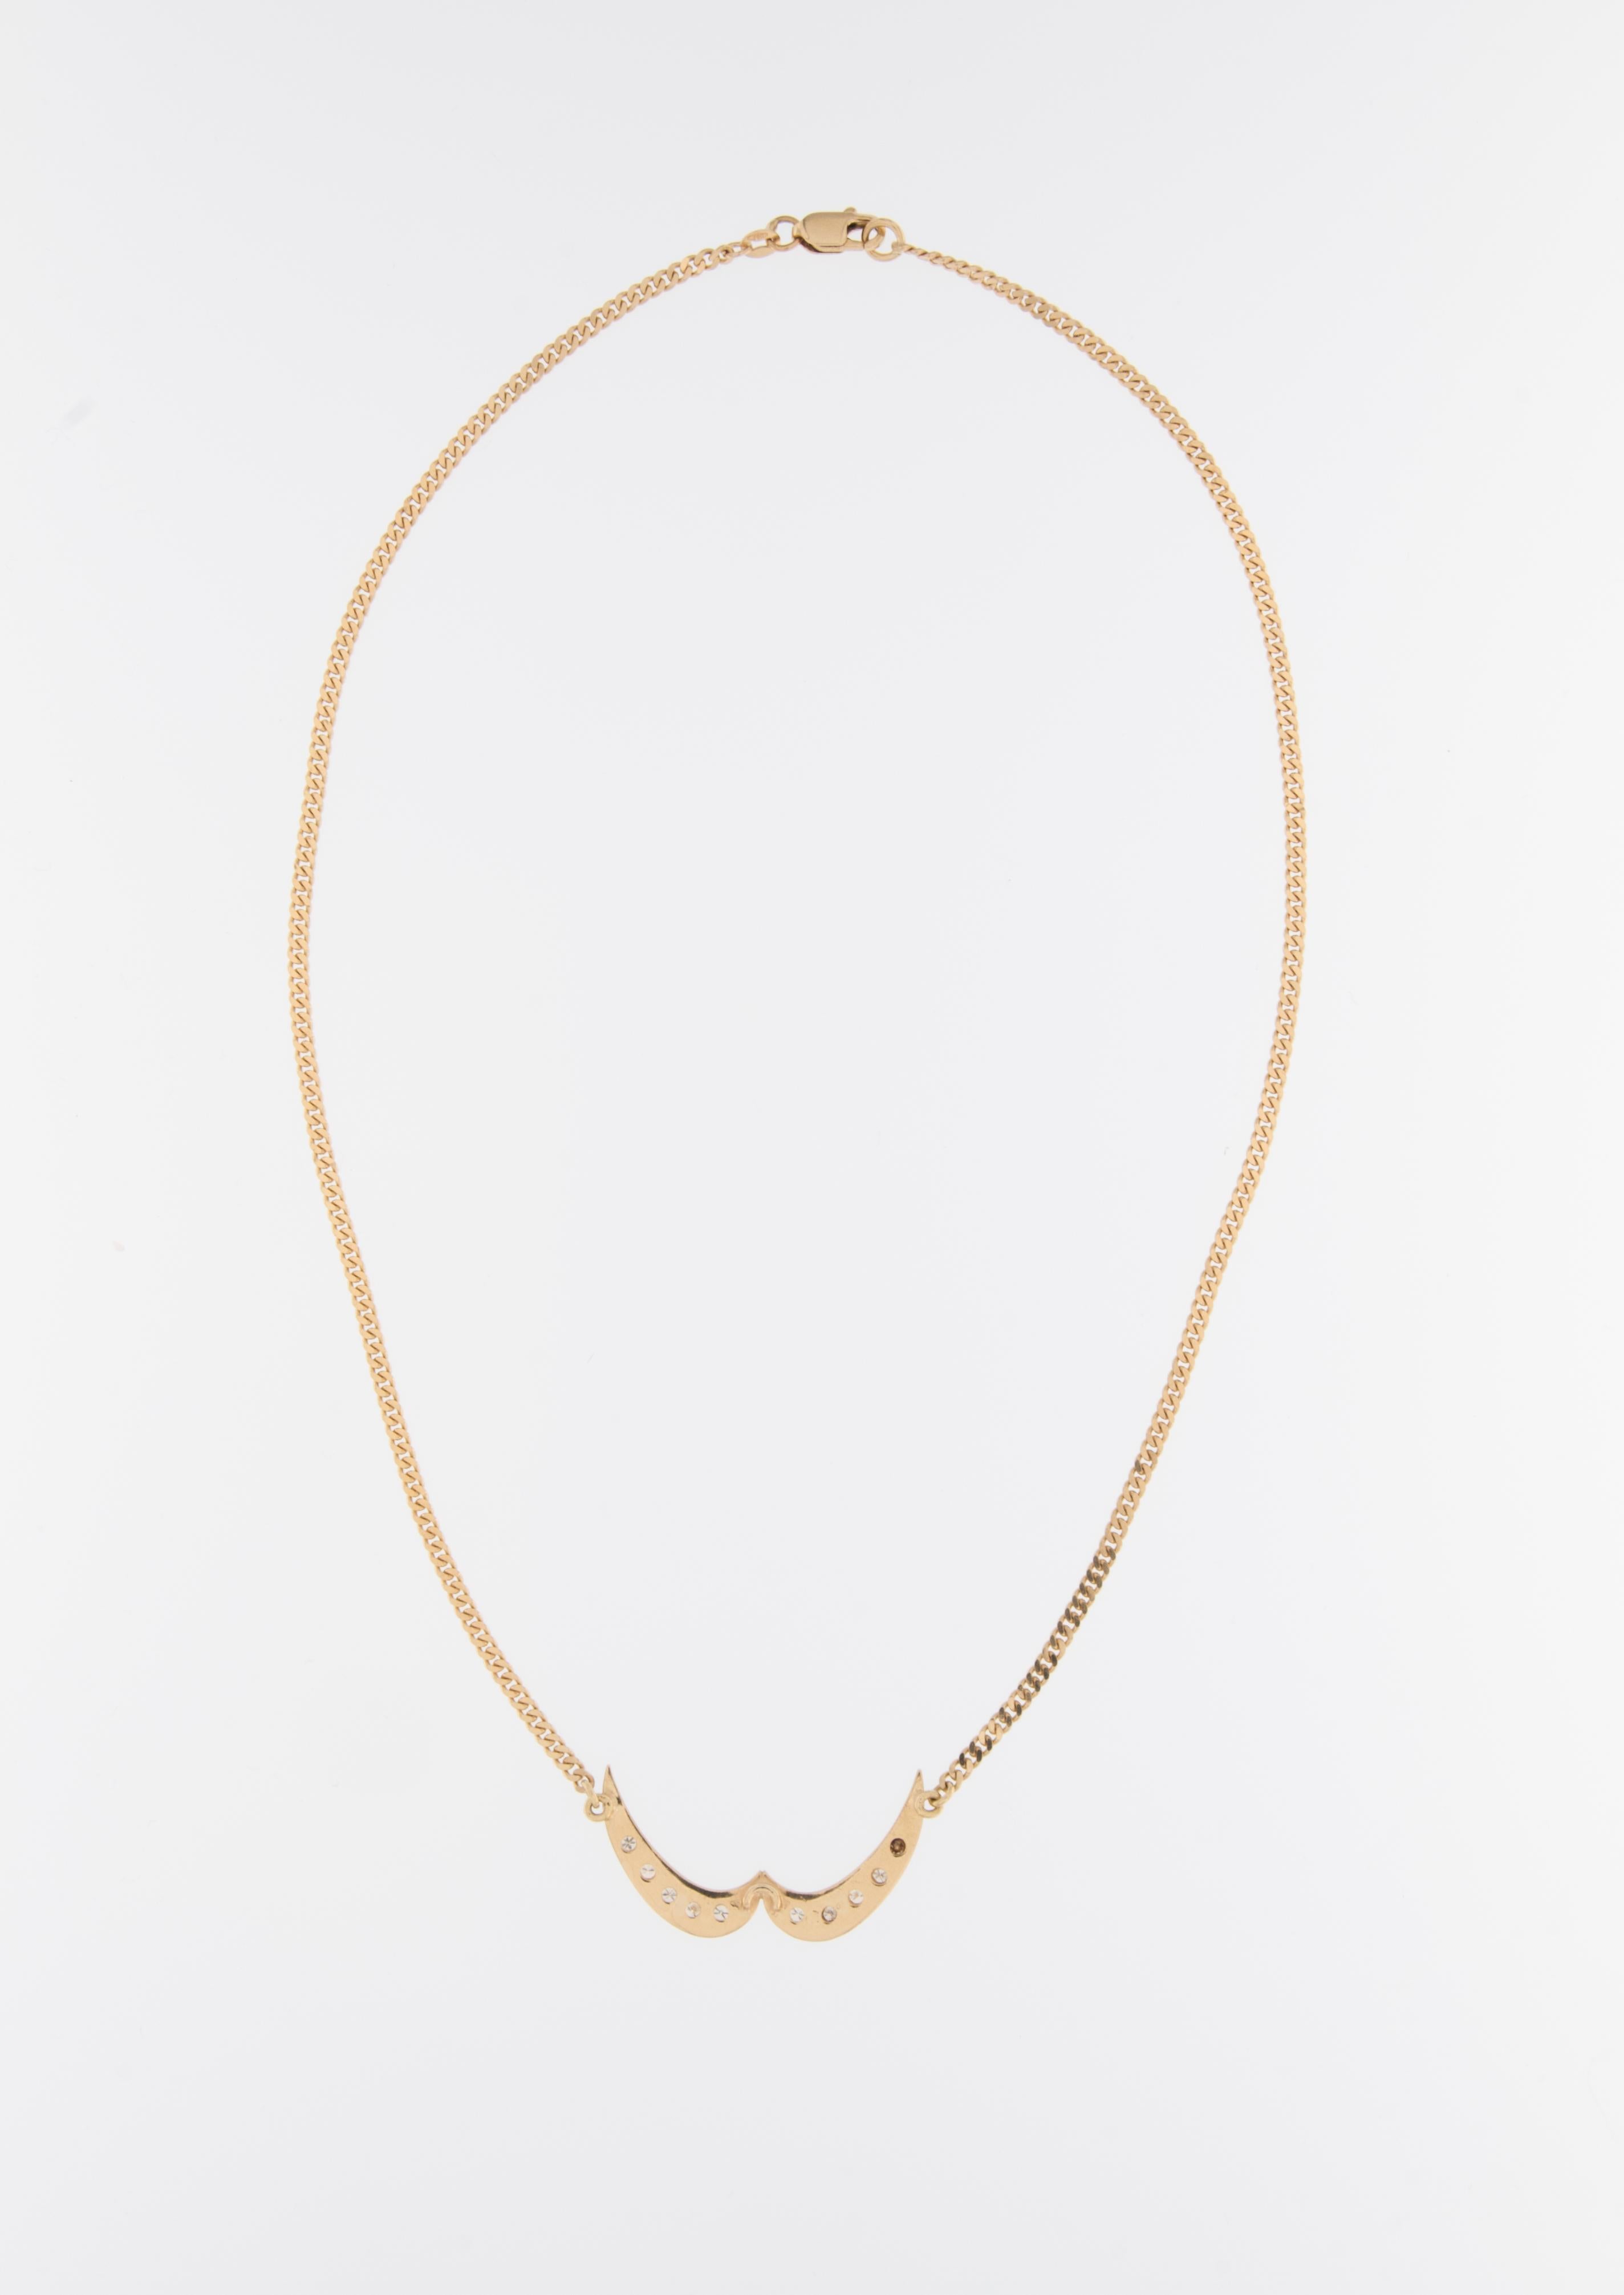 The Vintage Collar Shape Necklace is an exquisite piece of jewelry crafted from 18kt yellow gold and adorned with diamonds. 

The necklace is made from 18kt yellow gold, which is known for its timeless beauty and durability. This high-quality gold